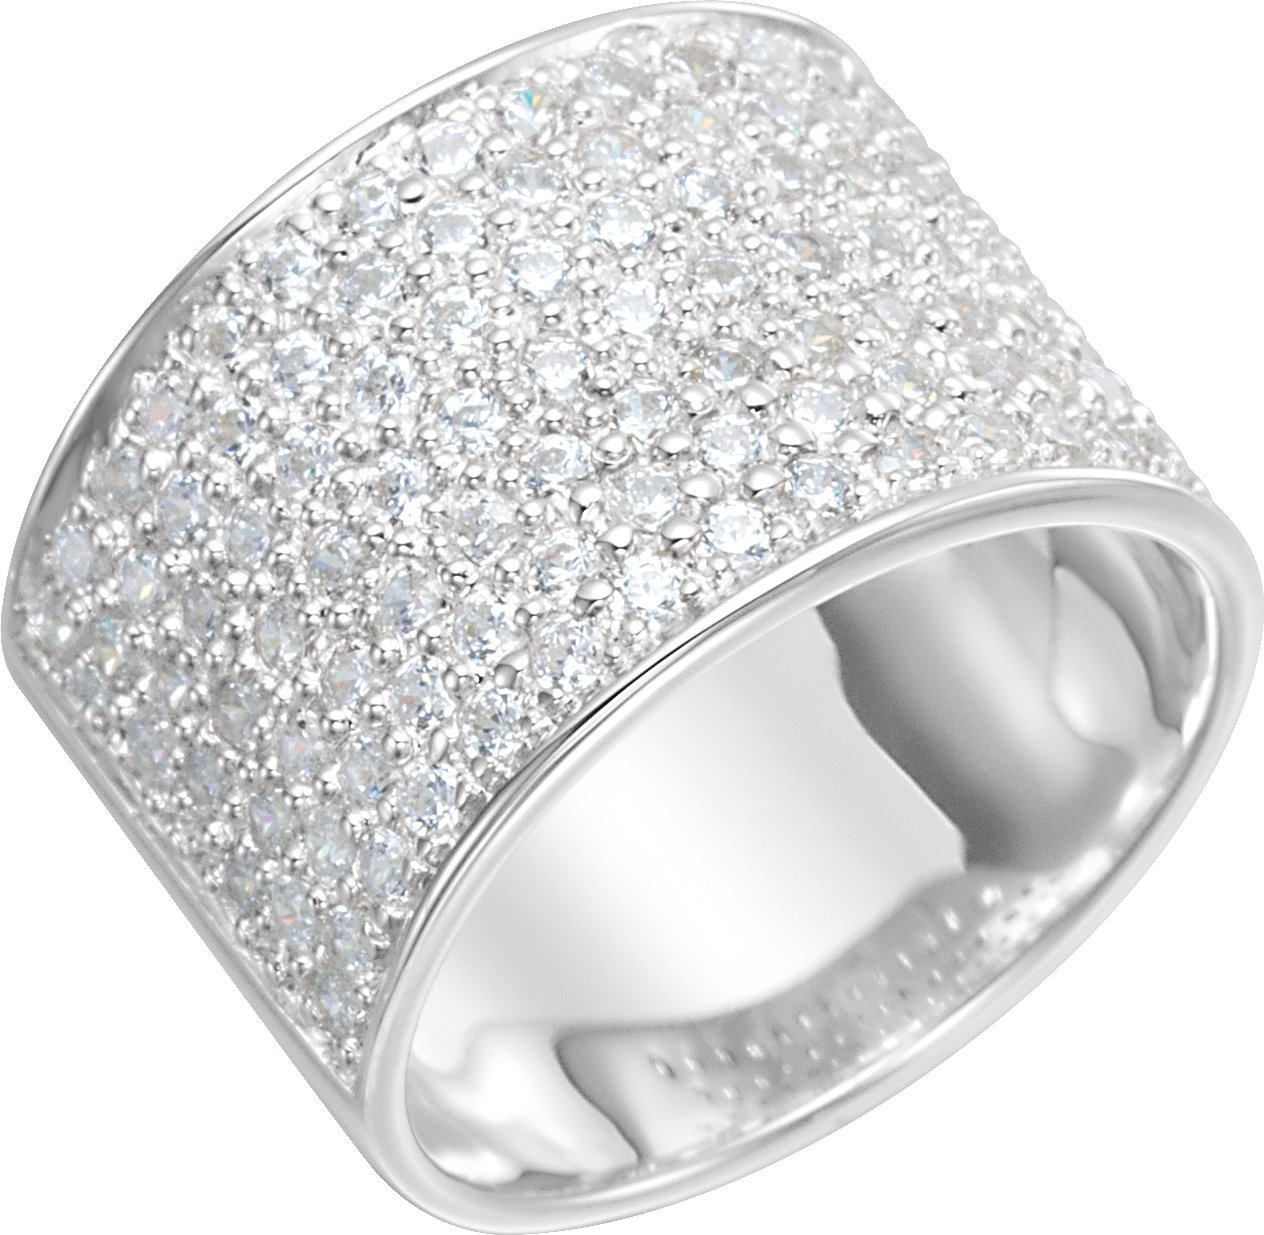 Sterling Silver Imitation White Cubic Zirconia Micro Pavé Ring